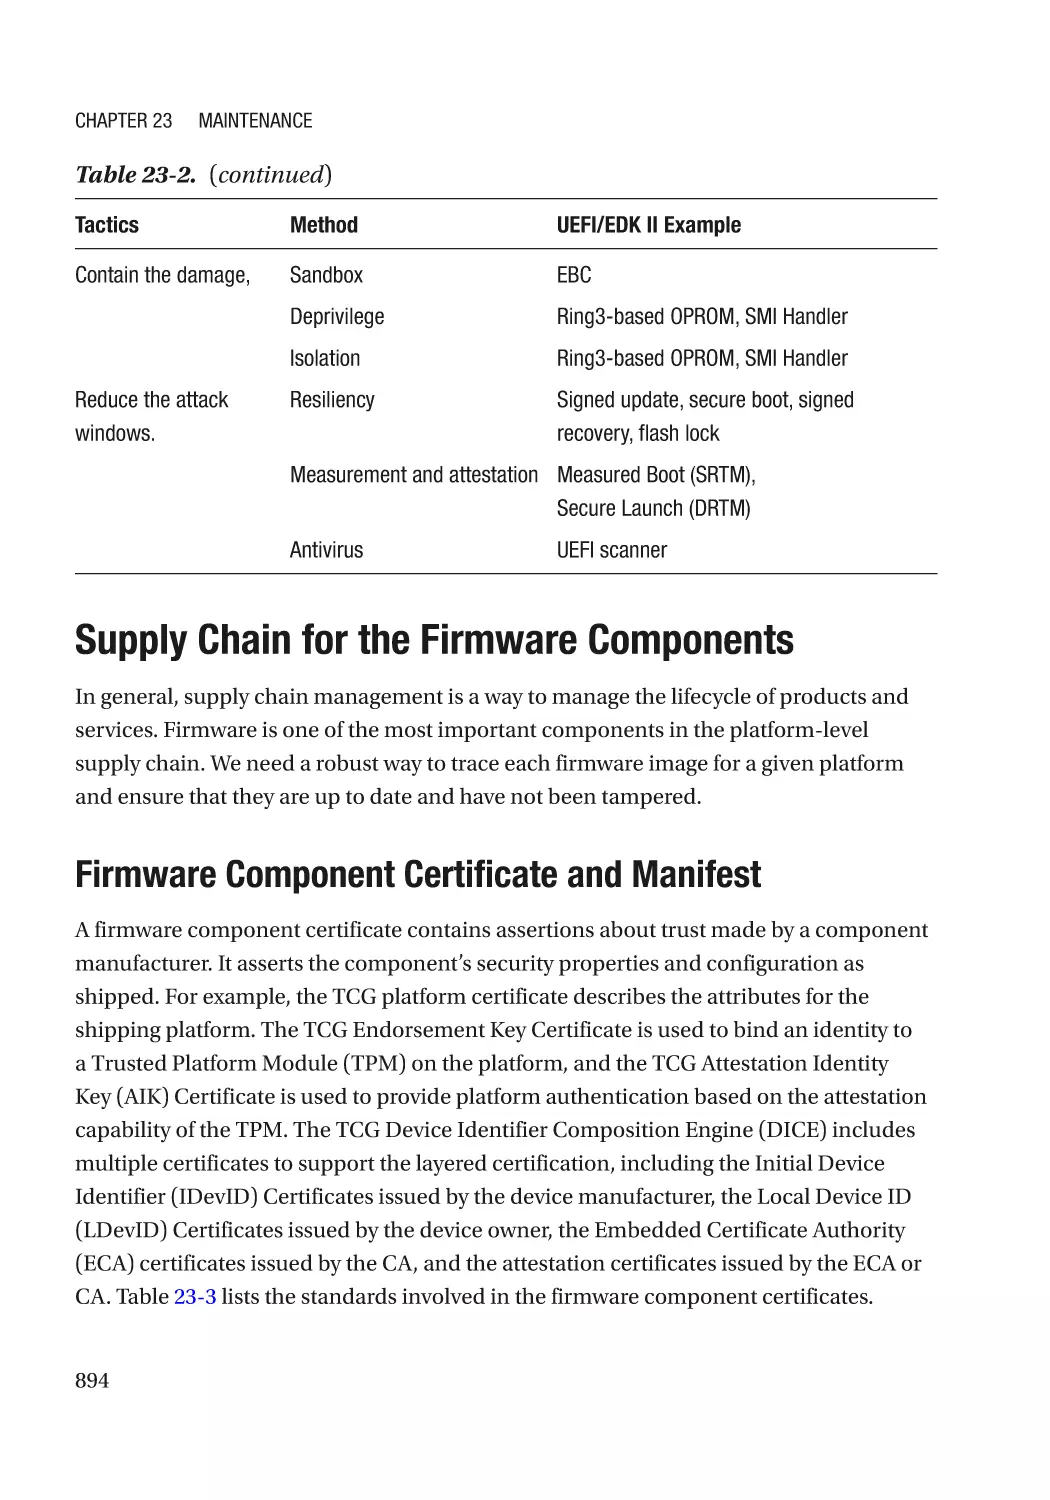 Supply Chain for the Firmware Components
Firmware Component Certificate and Manifest